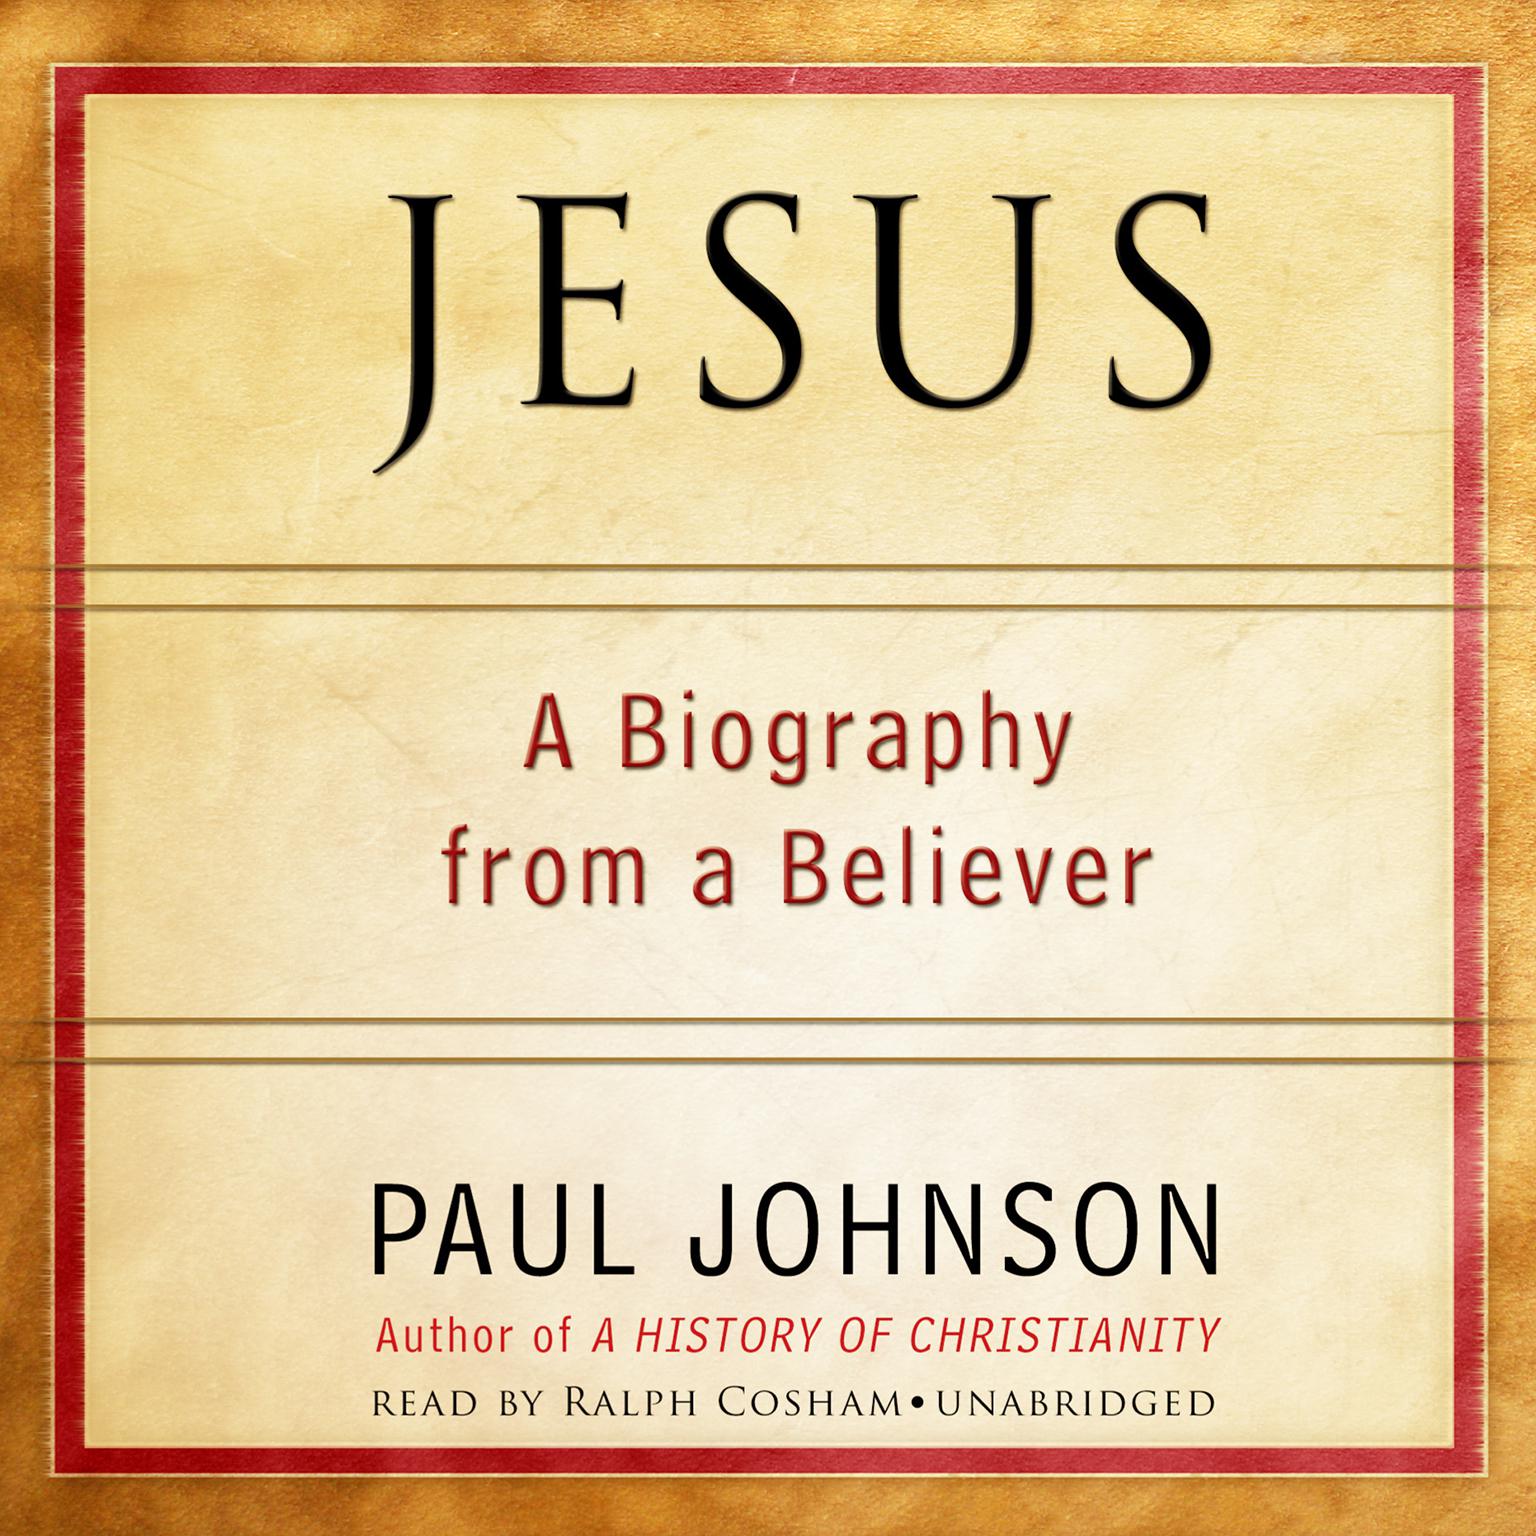 Jesus: A Biography from a Believer Audiobook, by Paul Johnson